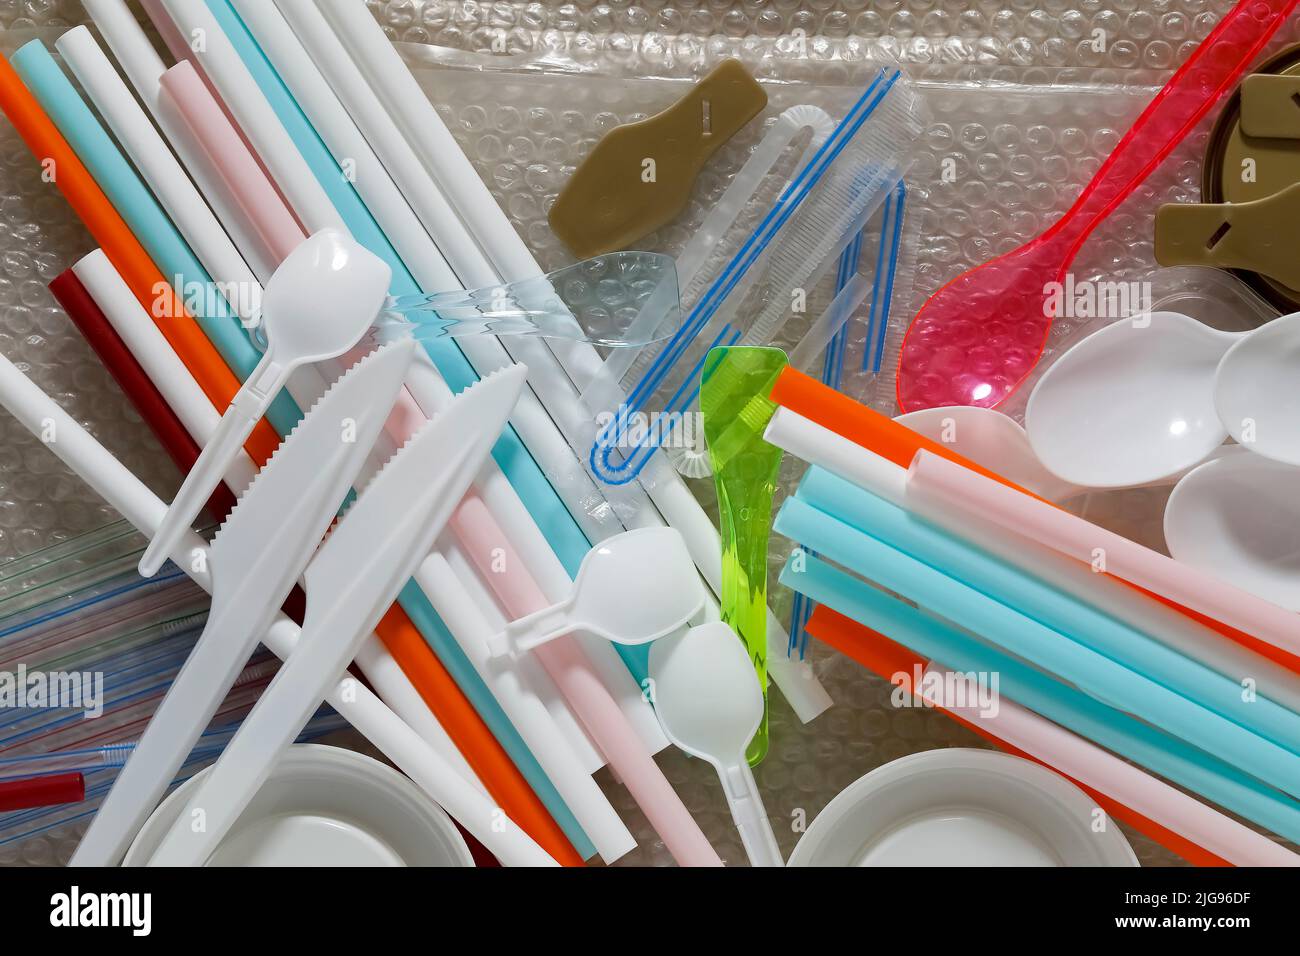 Disposable plastic objects easy and convenient to use but the material they are made of seriously pollutes the environment. Stock Photo